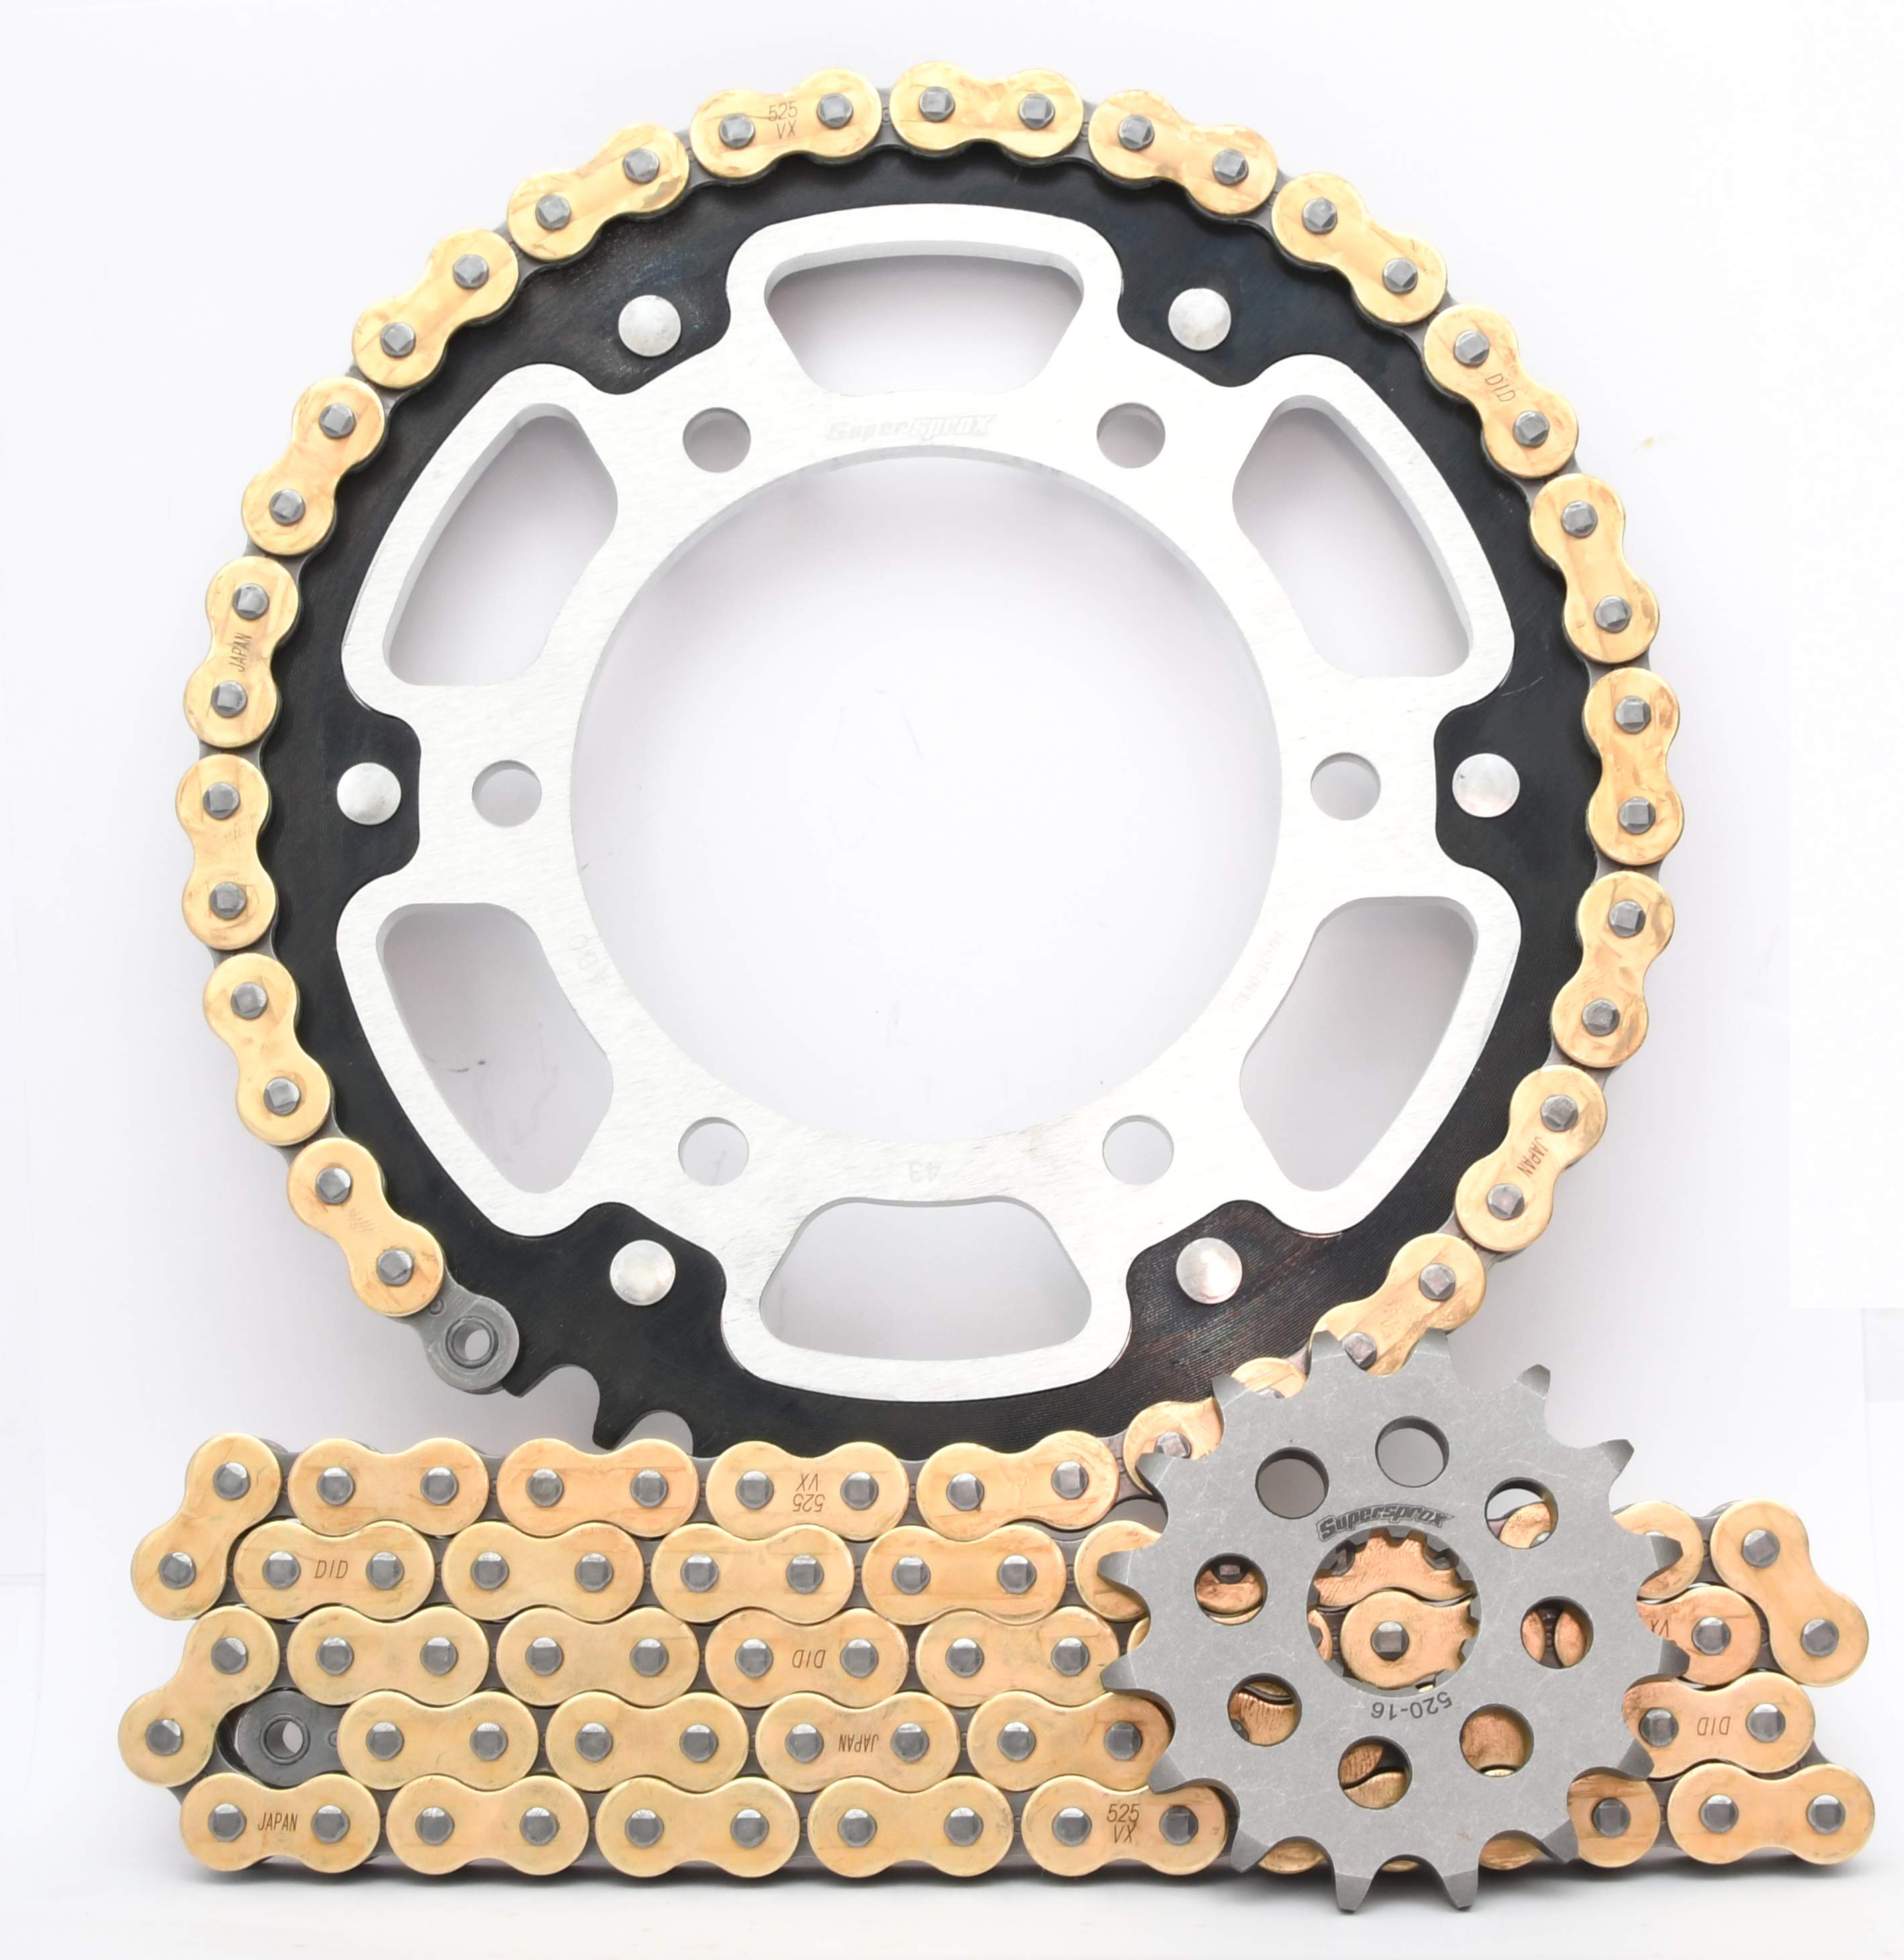 Supersprox Chain & Sprocket Kit for Yamaha MT-09 and XSR 900 - Standard Gearing